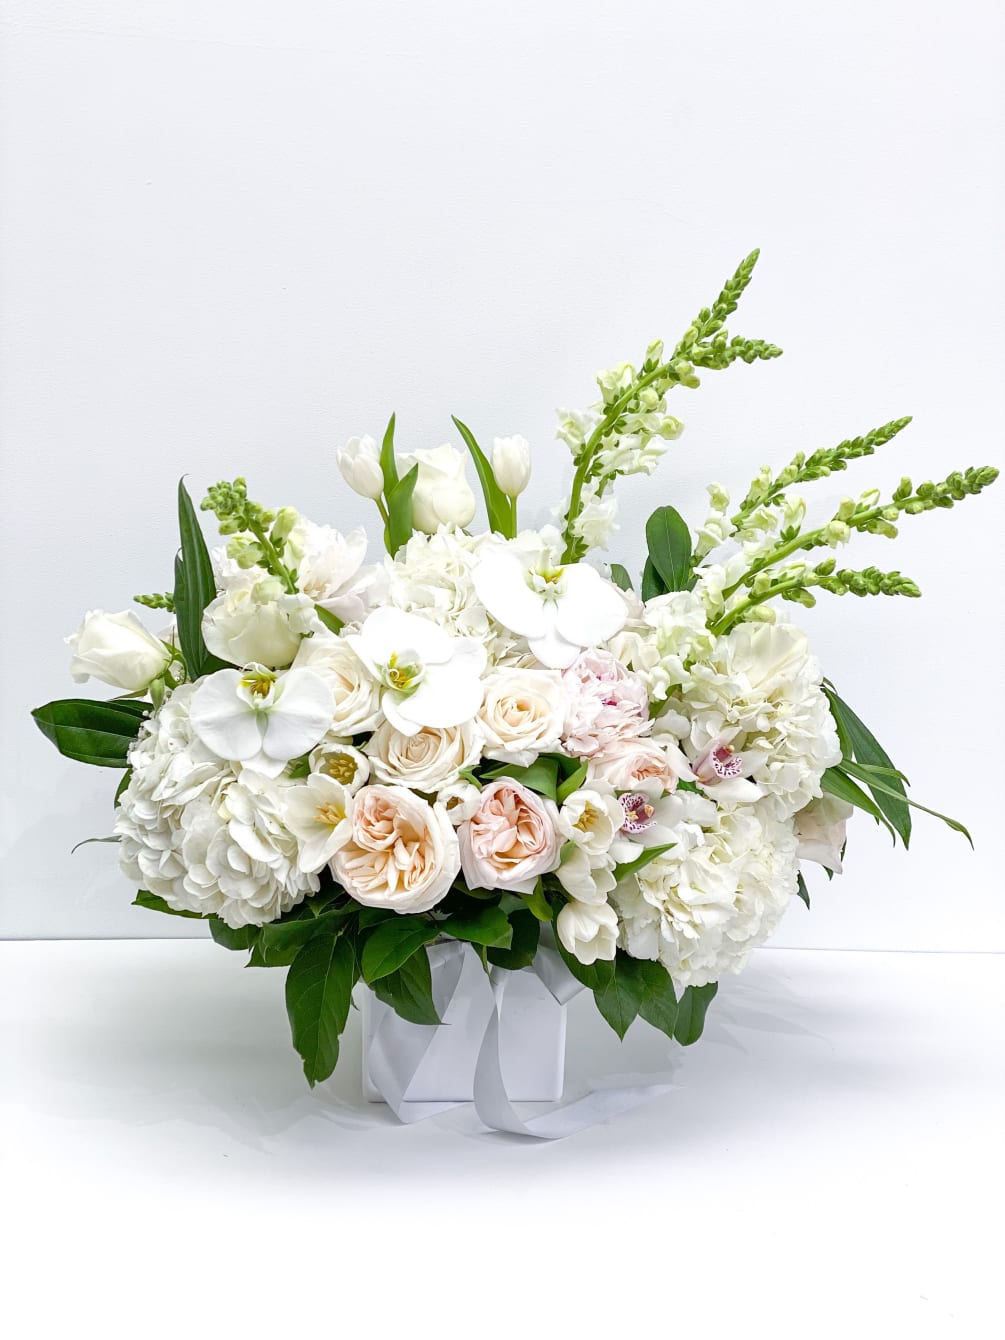 Enchantingly fragrant and delightfully beautiful, this garden roses arrangement is perfect for